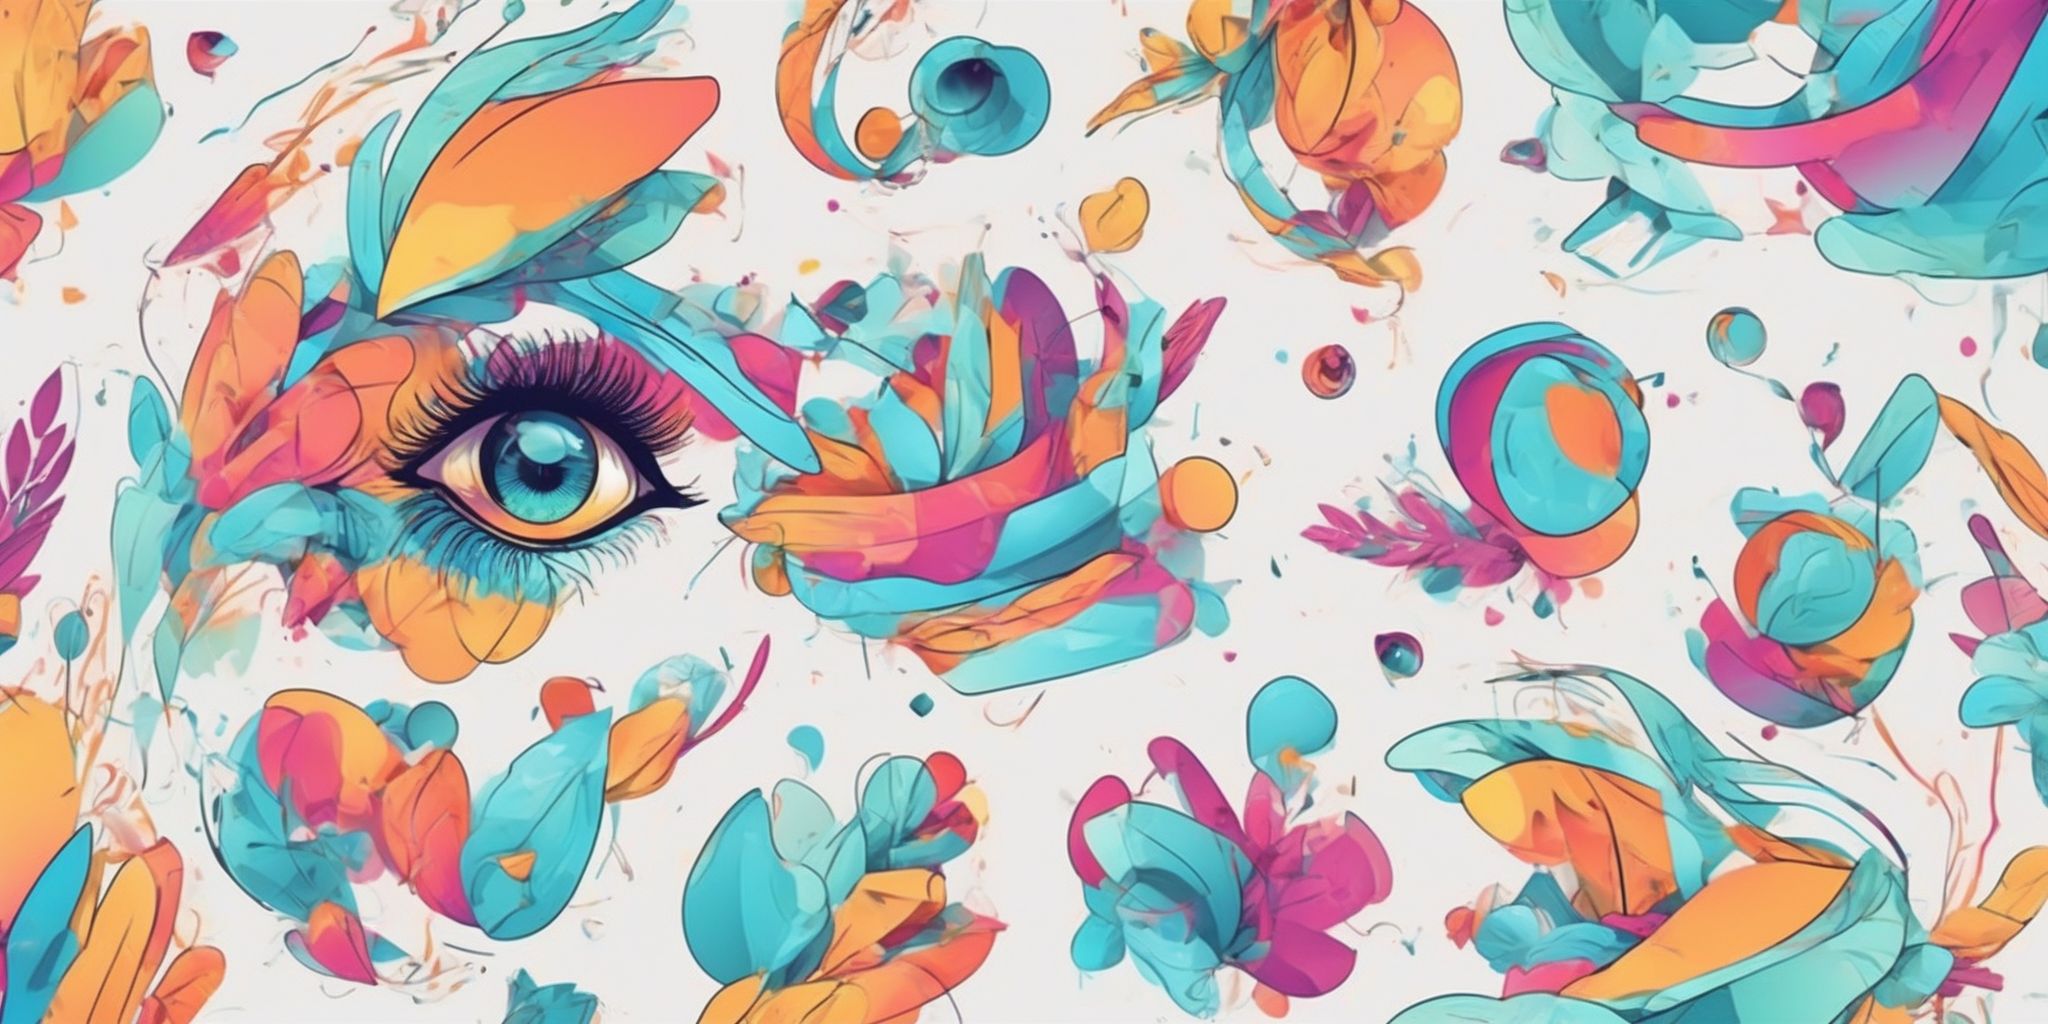 Eye-catching graphics in illustration style with gradients and white background